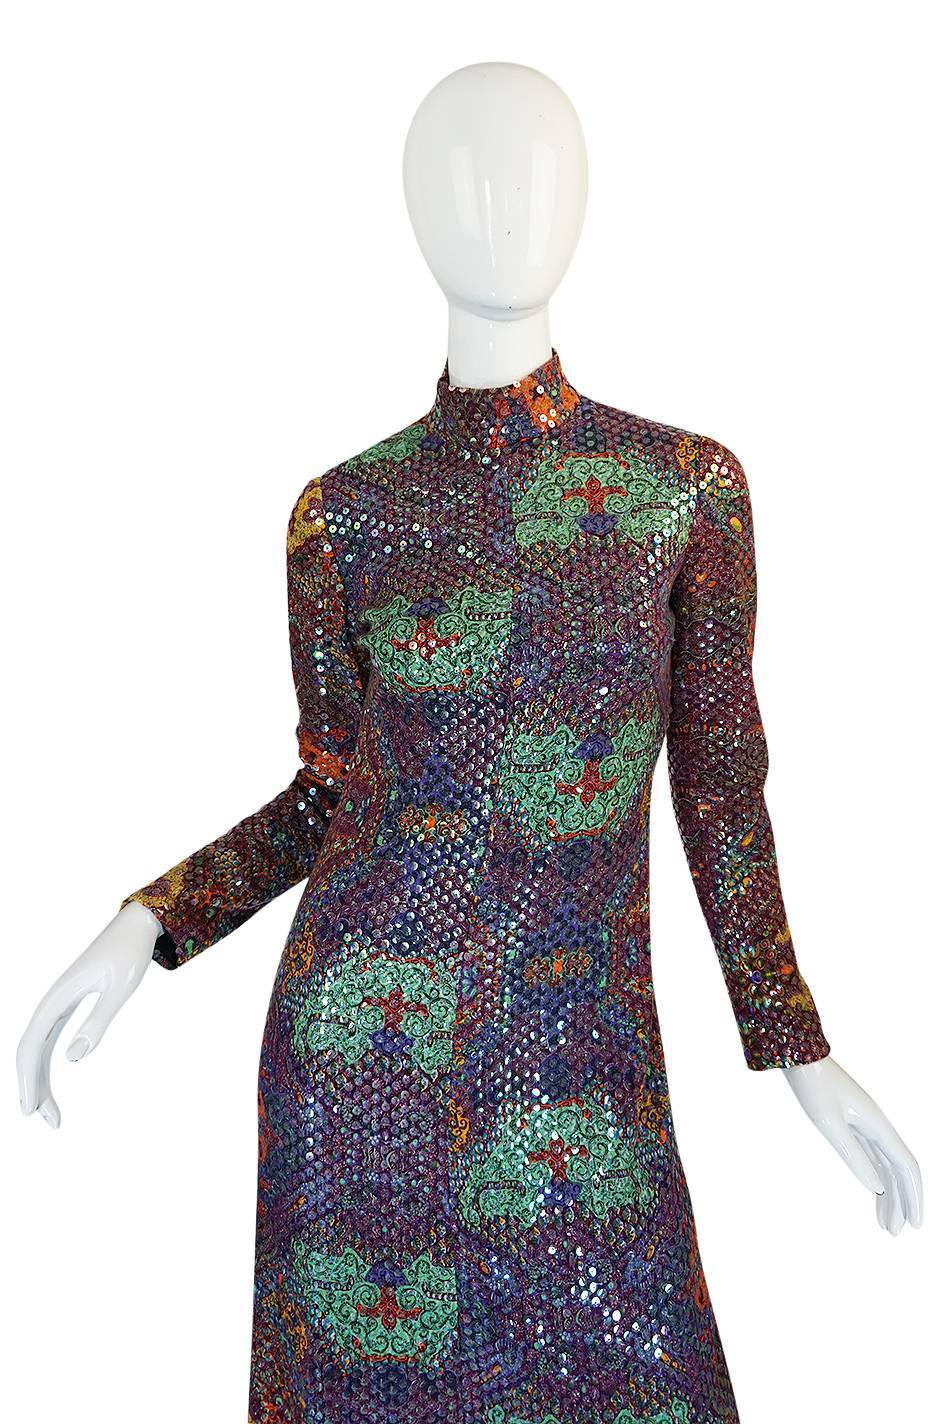 Women's Documented 1971 Malcolm Starr Sequin Covered Dress